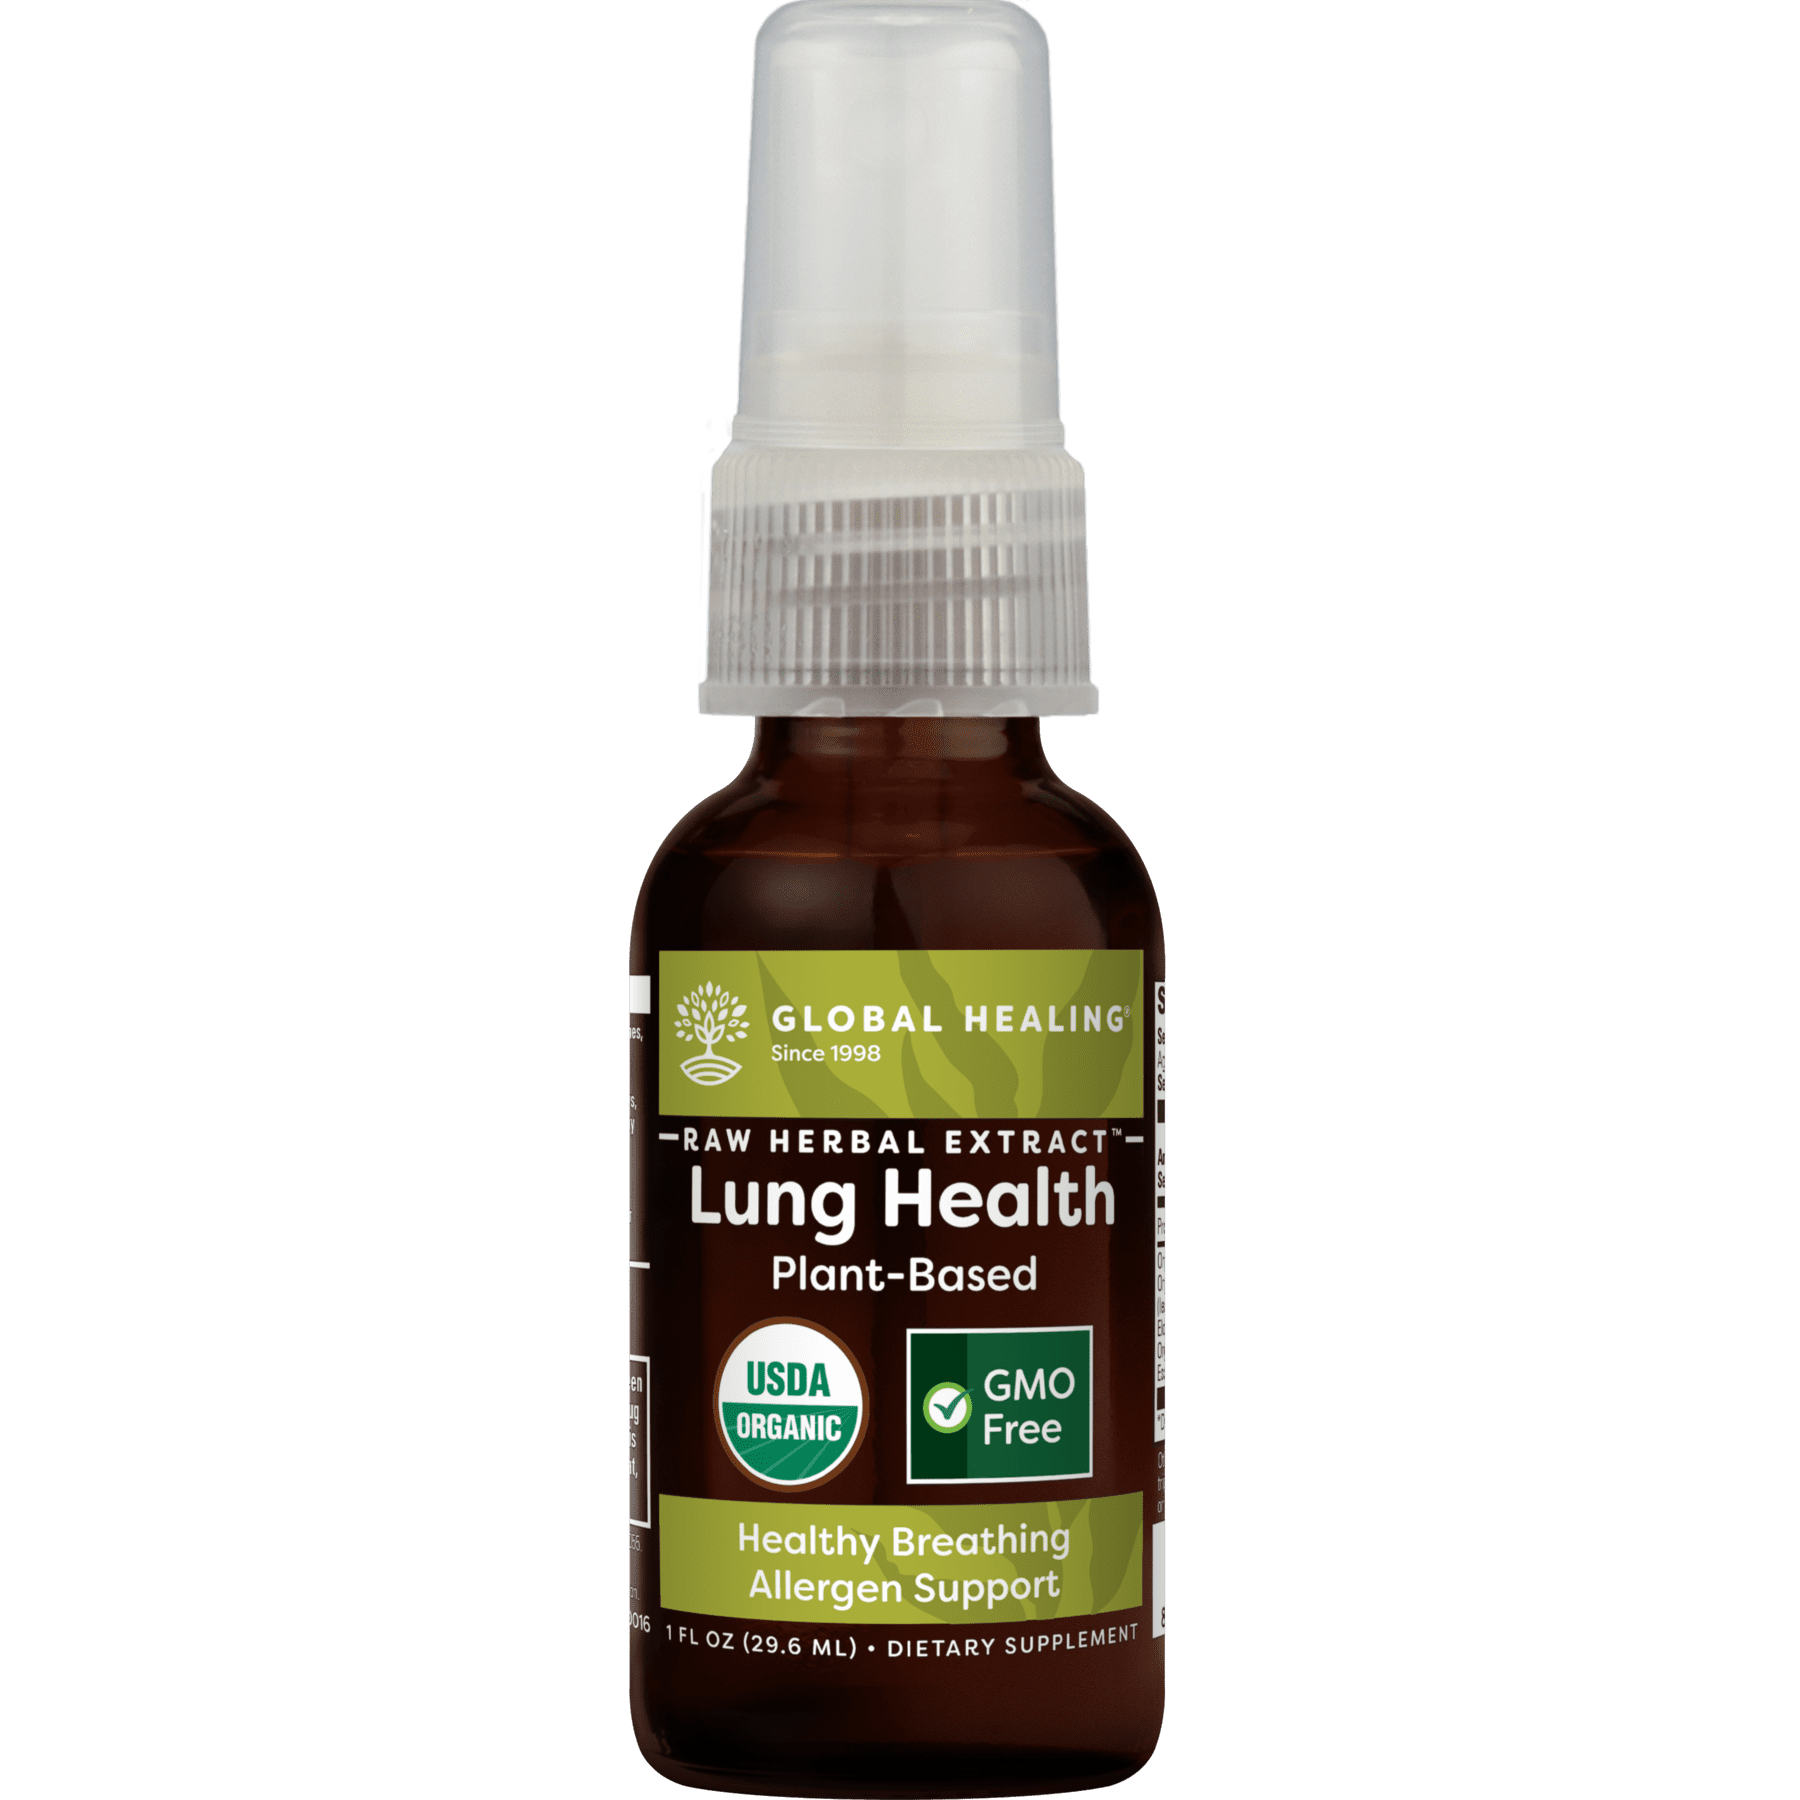 Tar Clean For Lungs Detox Lungs Cleaner For Smokers -225 ML Herbals Lungs  Detox